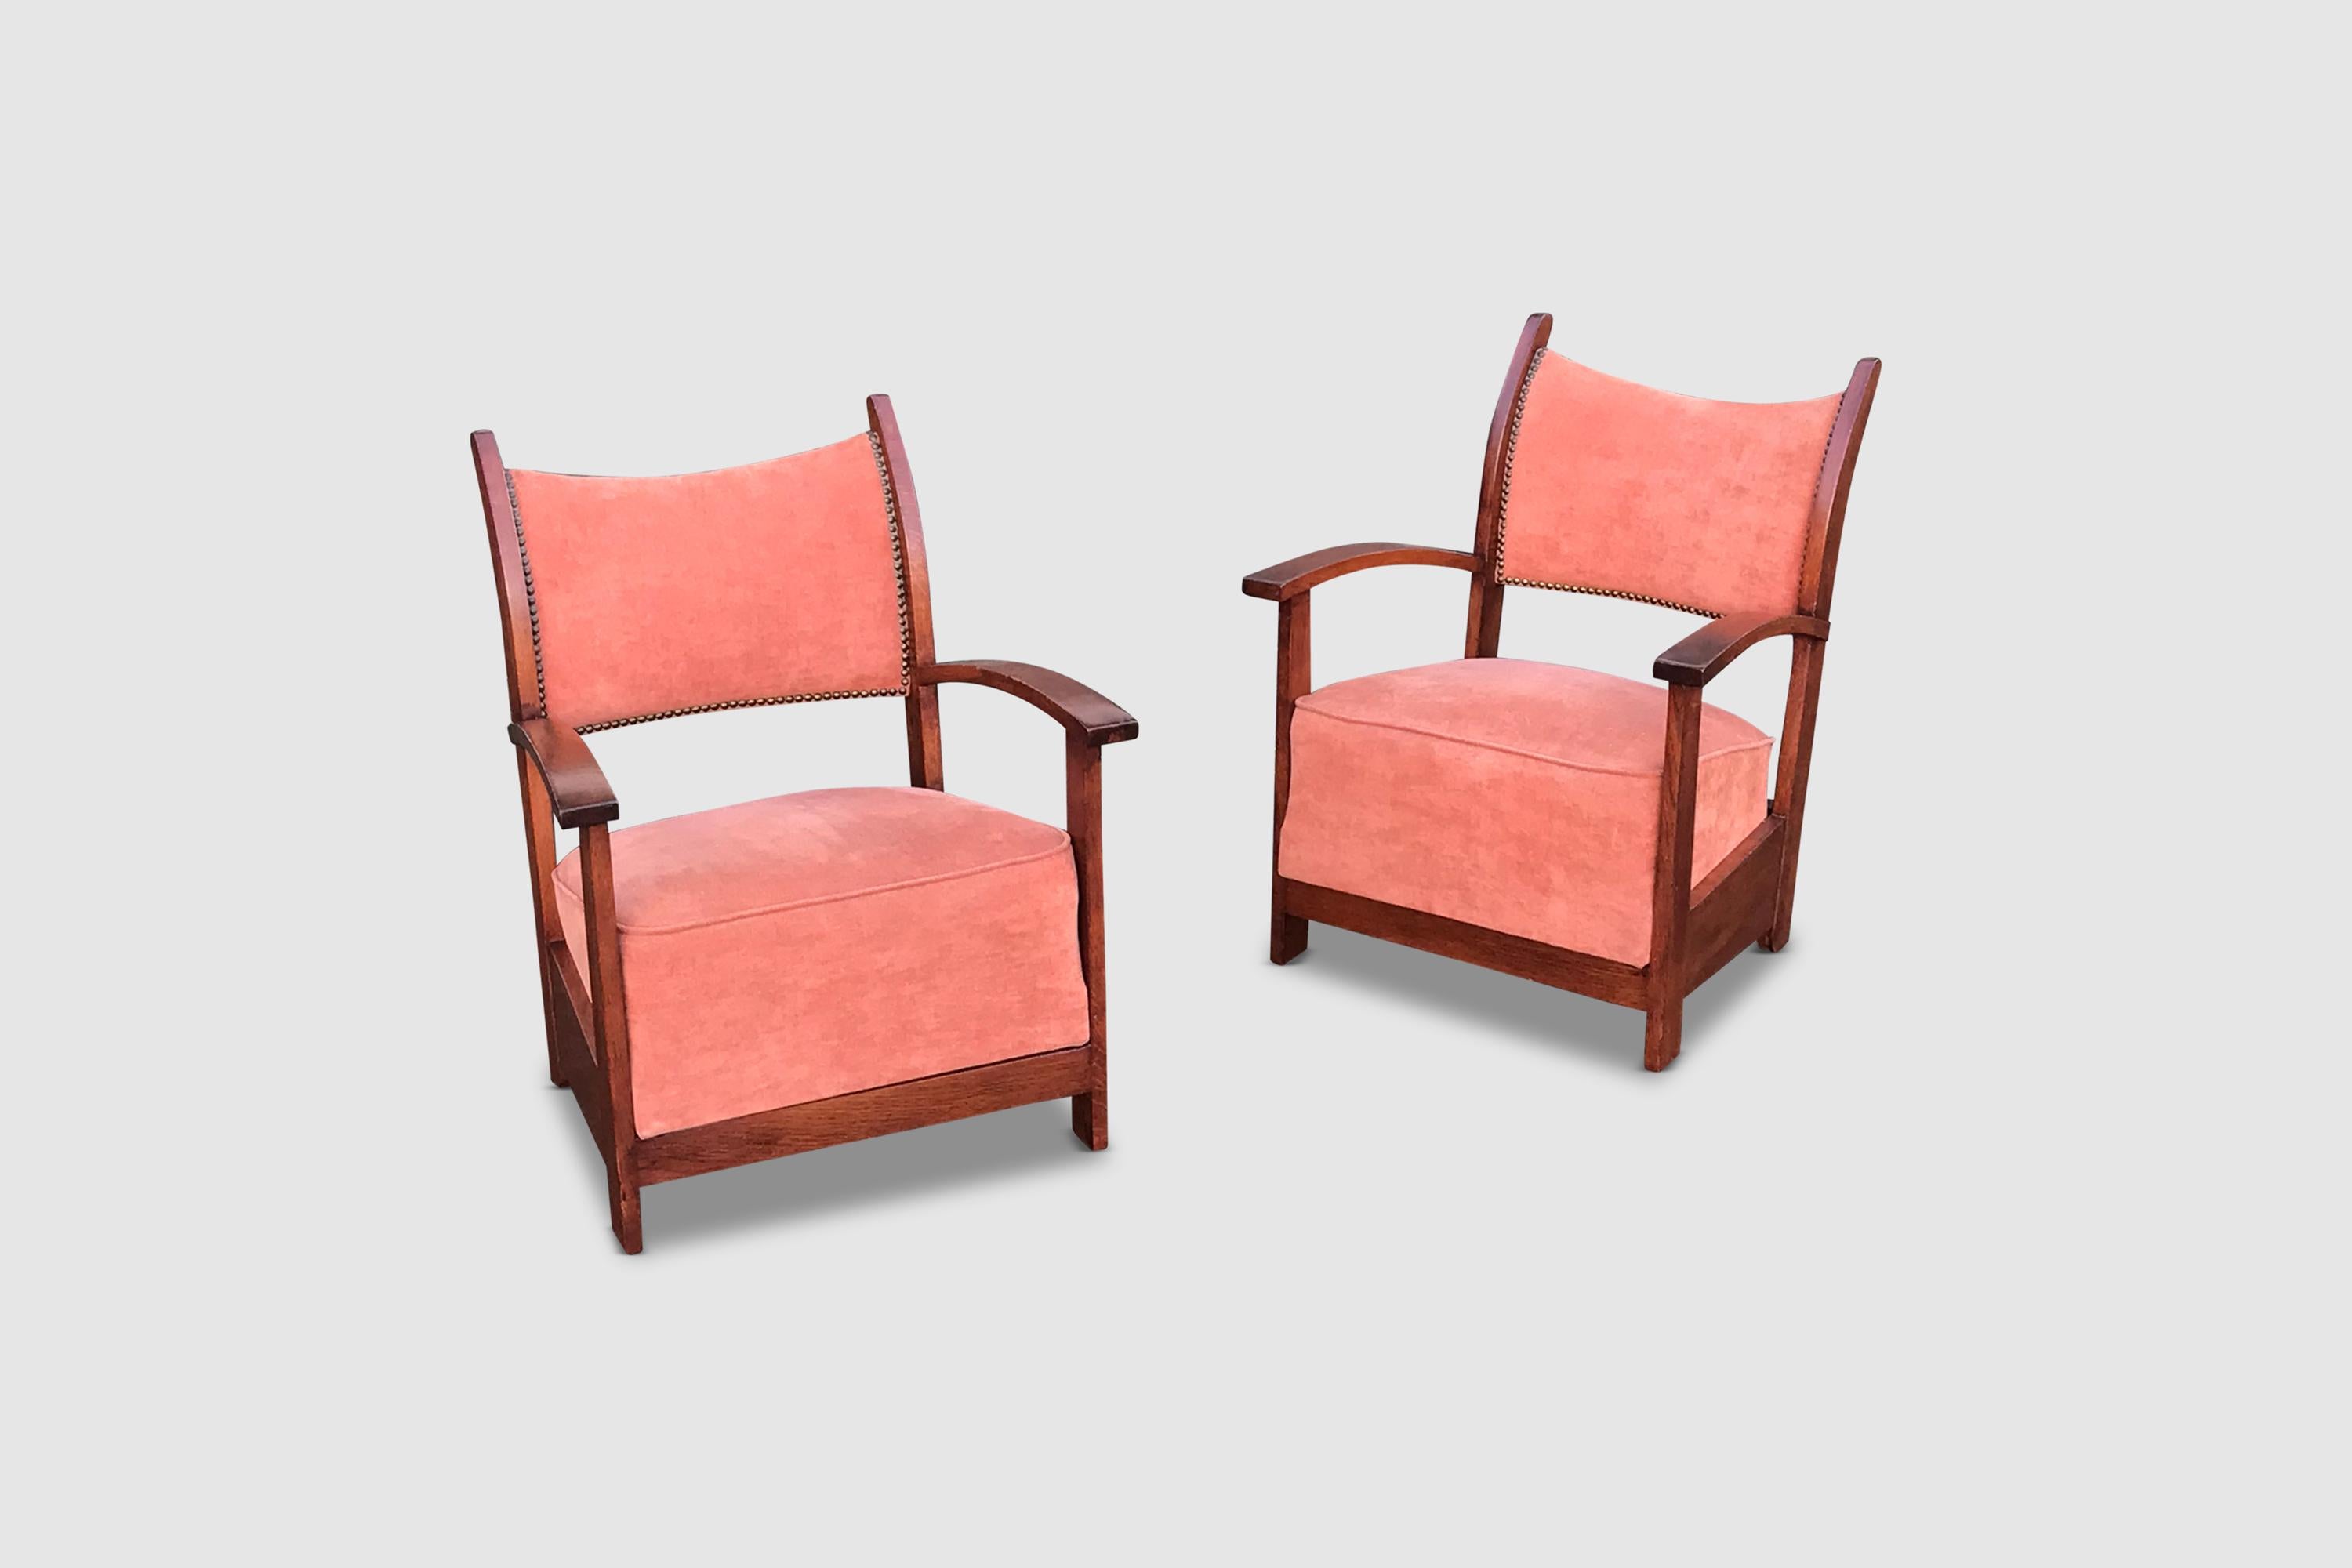 Low Oak and Tweed Armchairs Amsterdamse School 1930s, Set of 2 For Sale 1